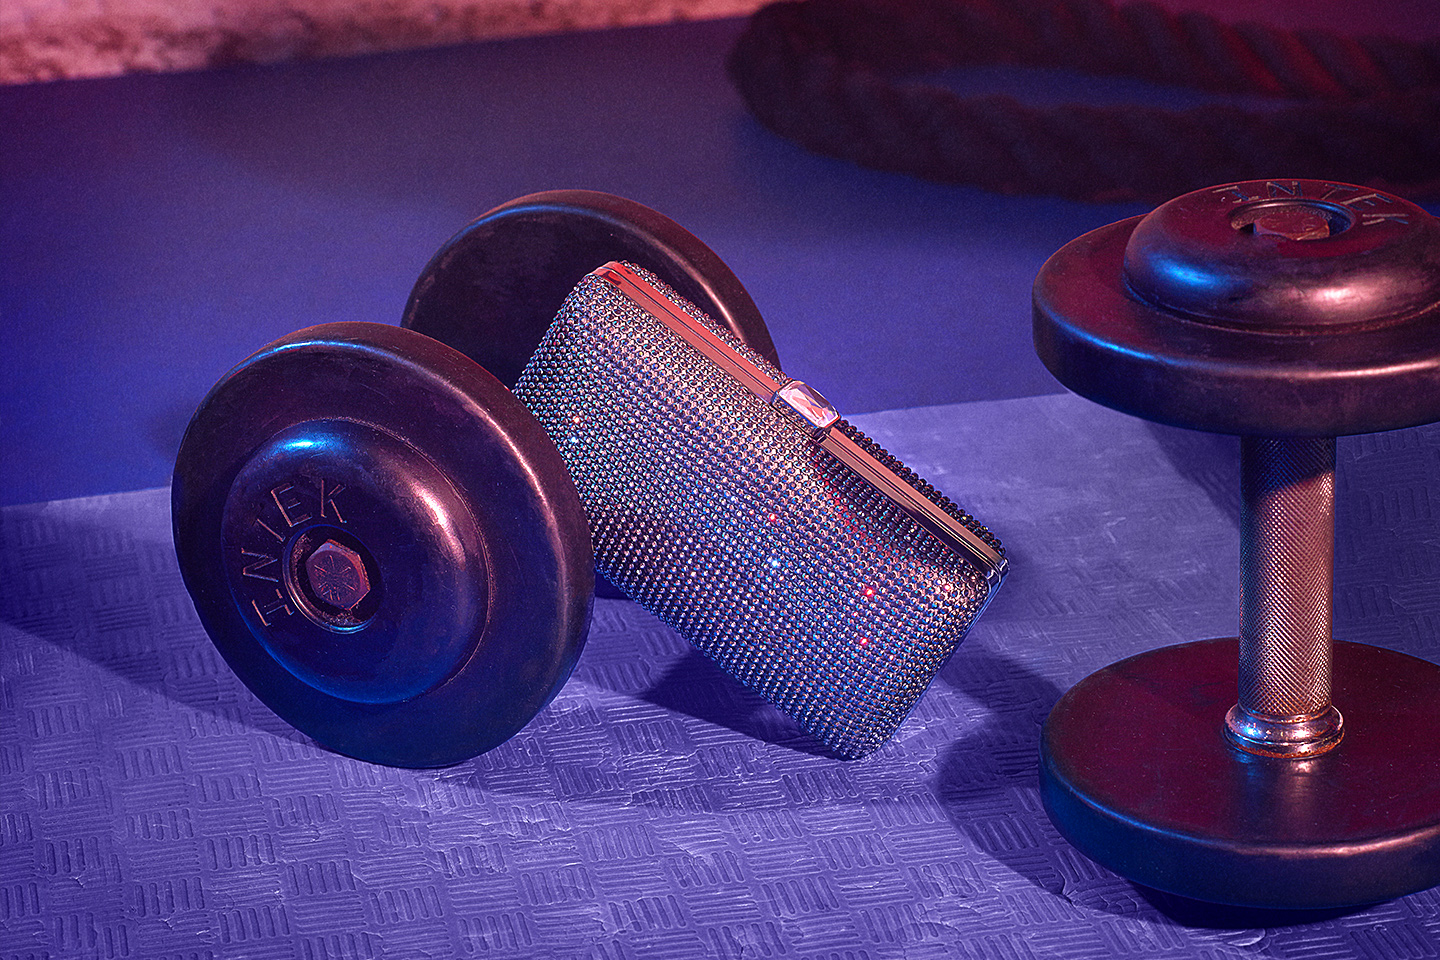 10.6_ClassicHoliday_GYM_STILL LIFE_143_RS_RETOUCHED.jpg